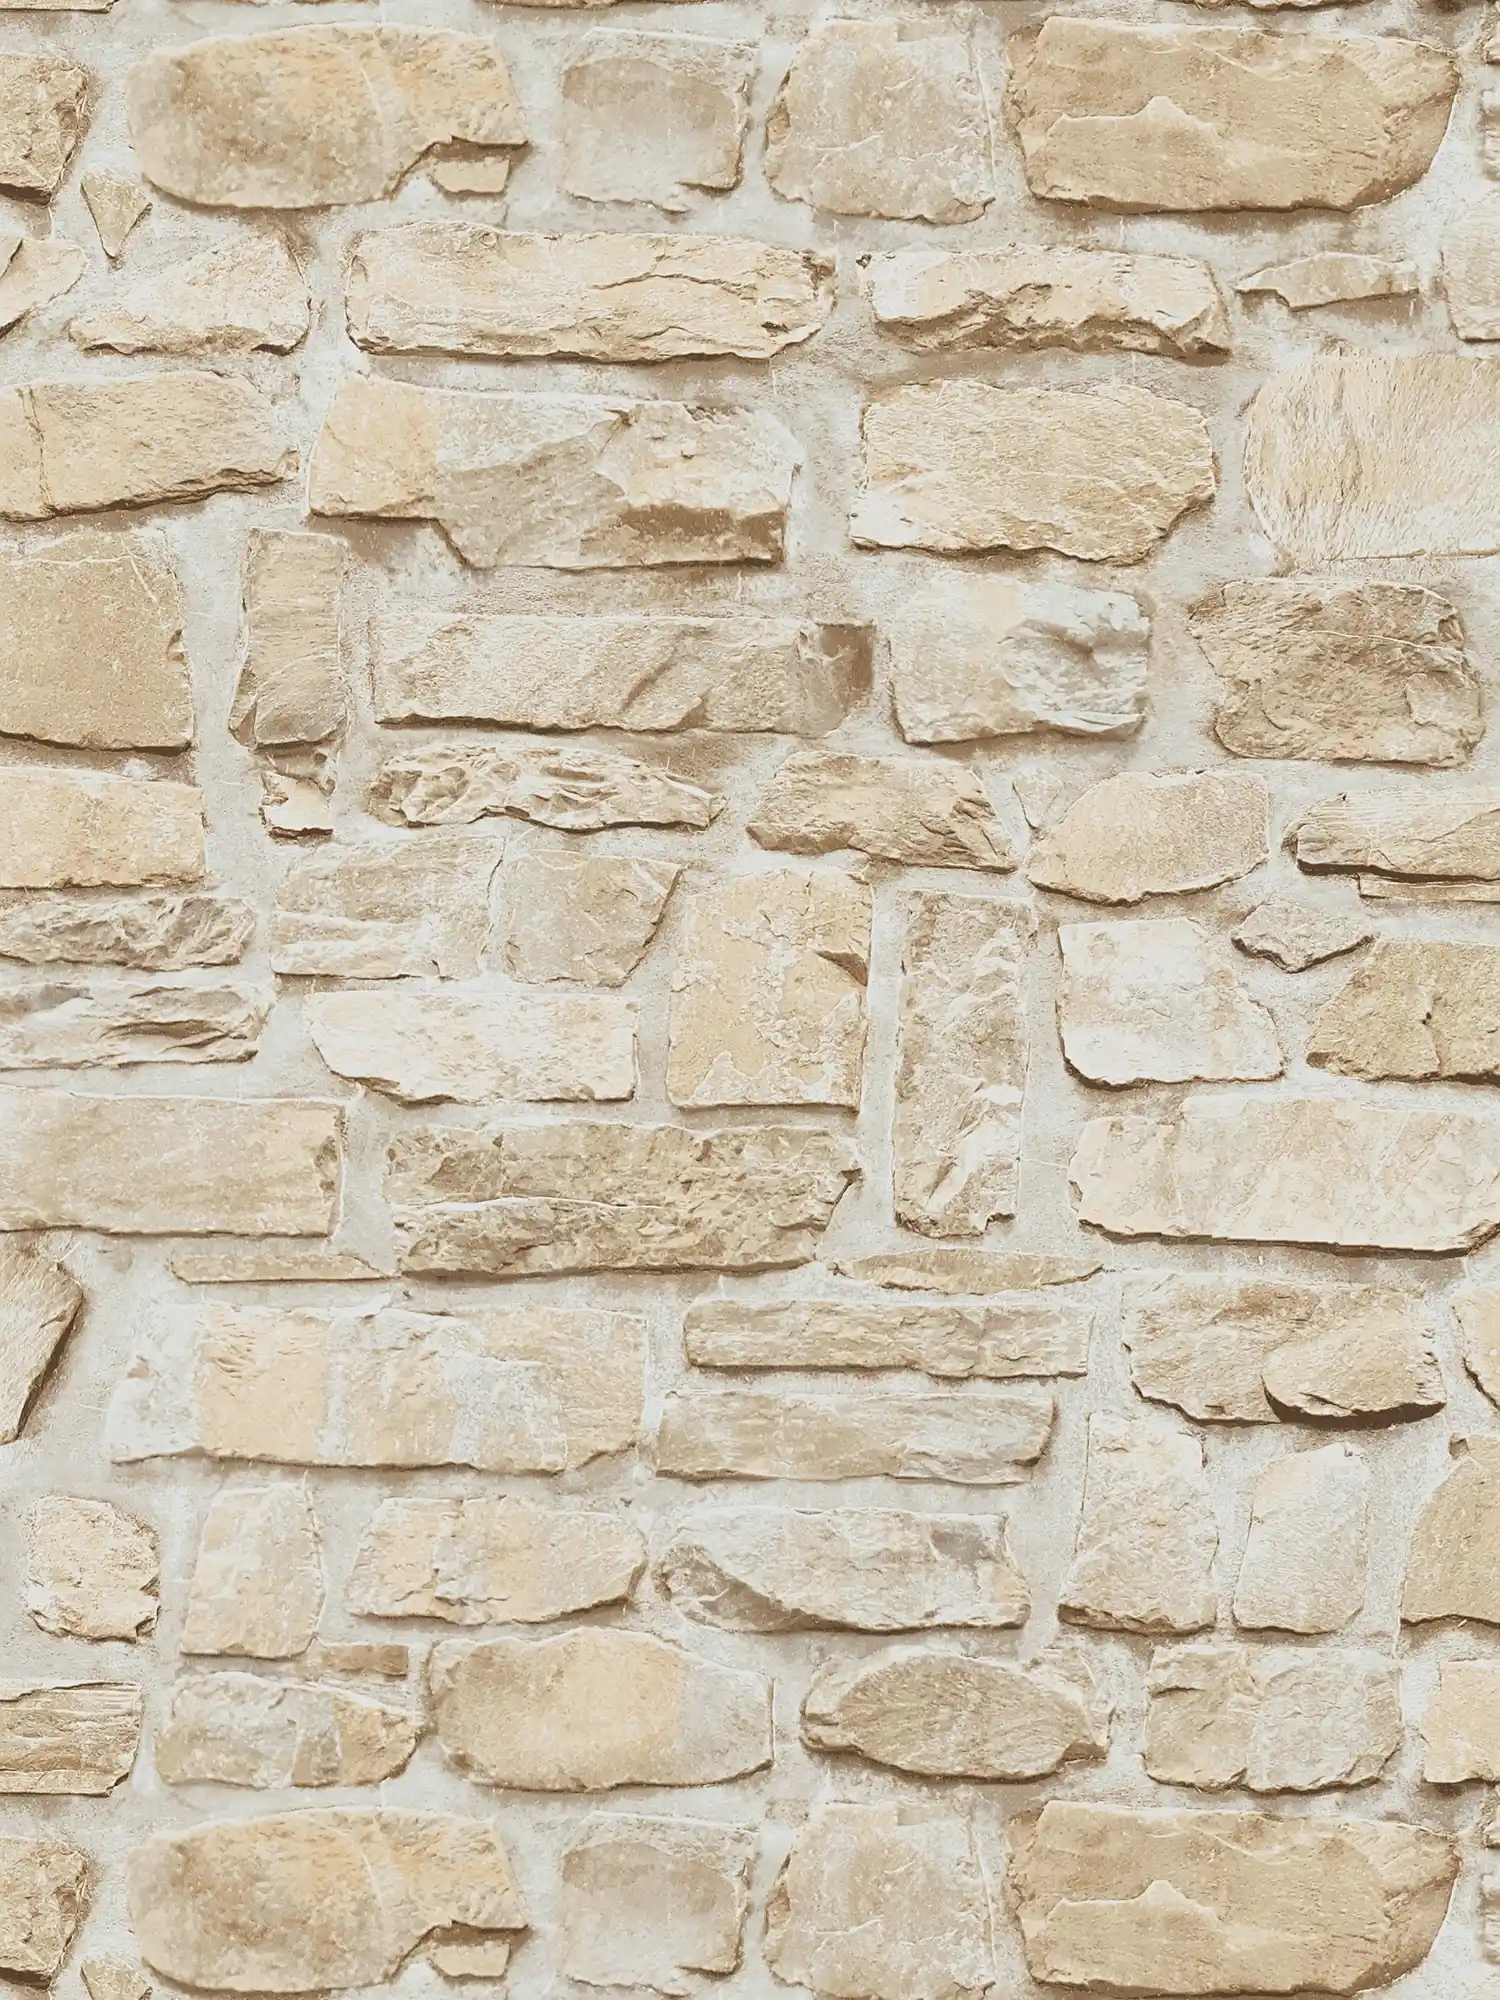 Self-adhesive wallpaper | natural stone wall in 3D look - beige
